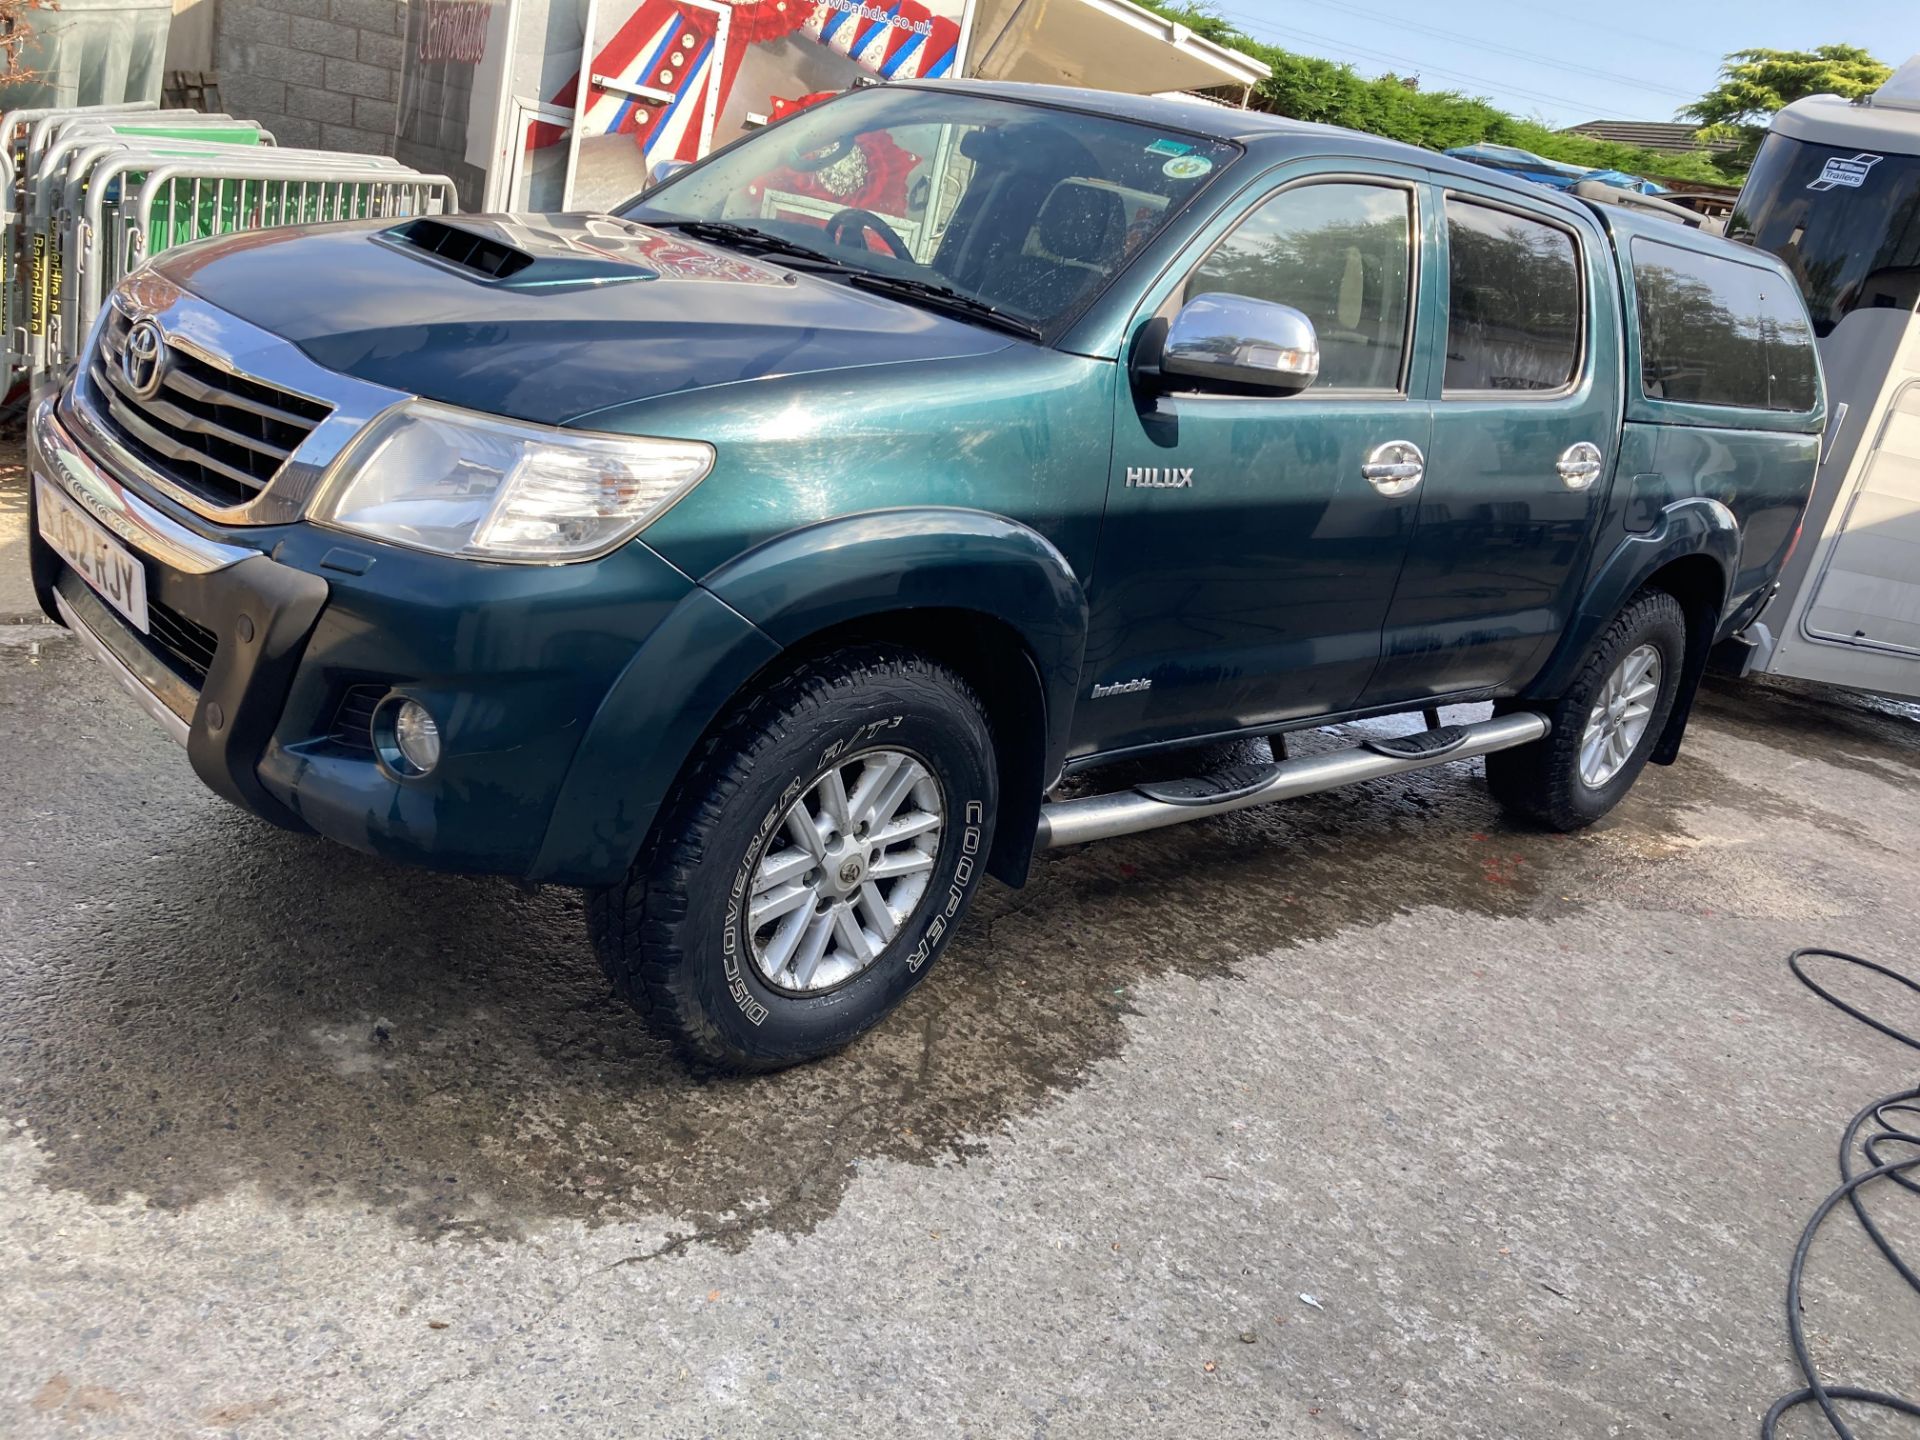 2012 TOYOTA HILUX INVINCIBLE. LOCATION: NORTHERN IRELAND - Image 6 of 26